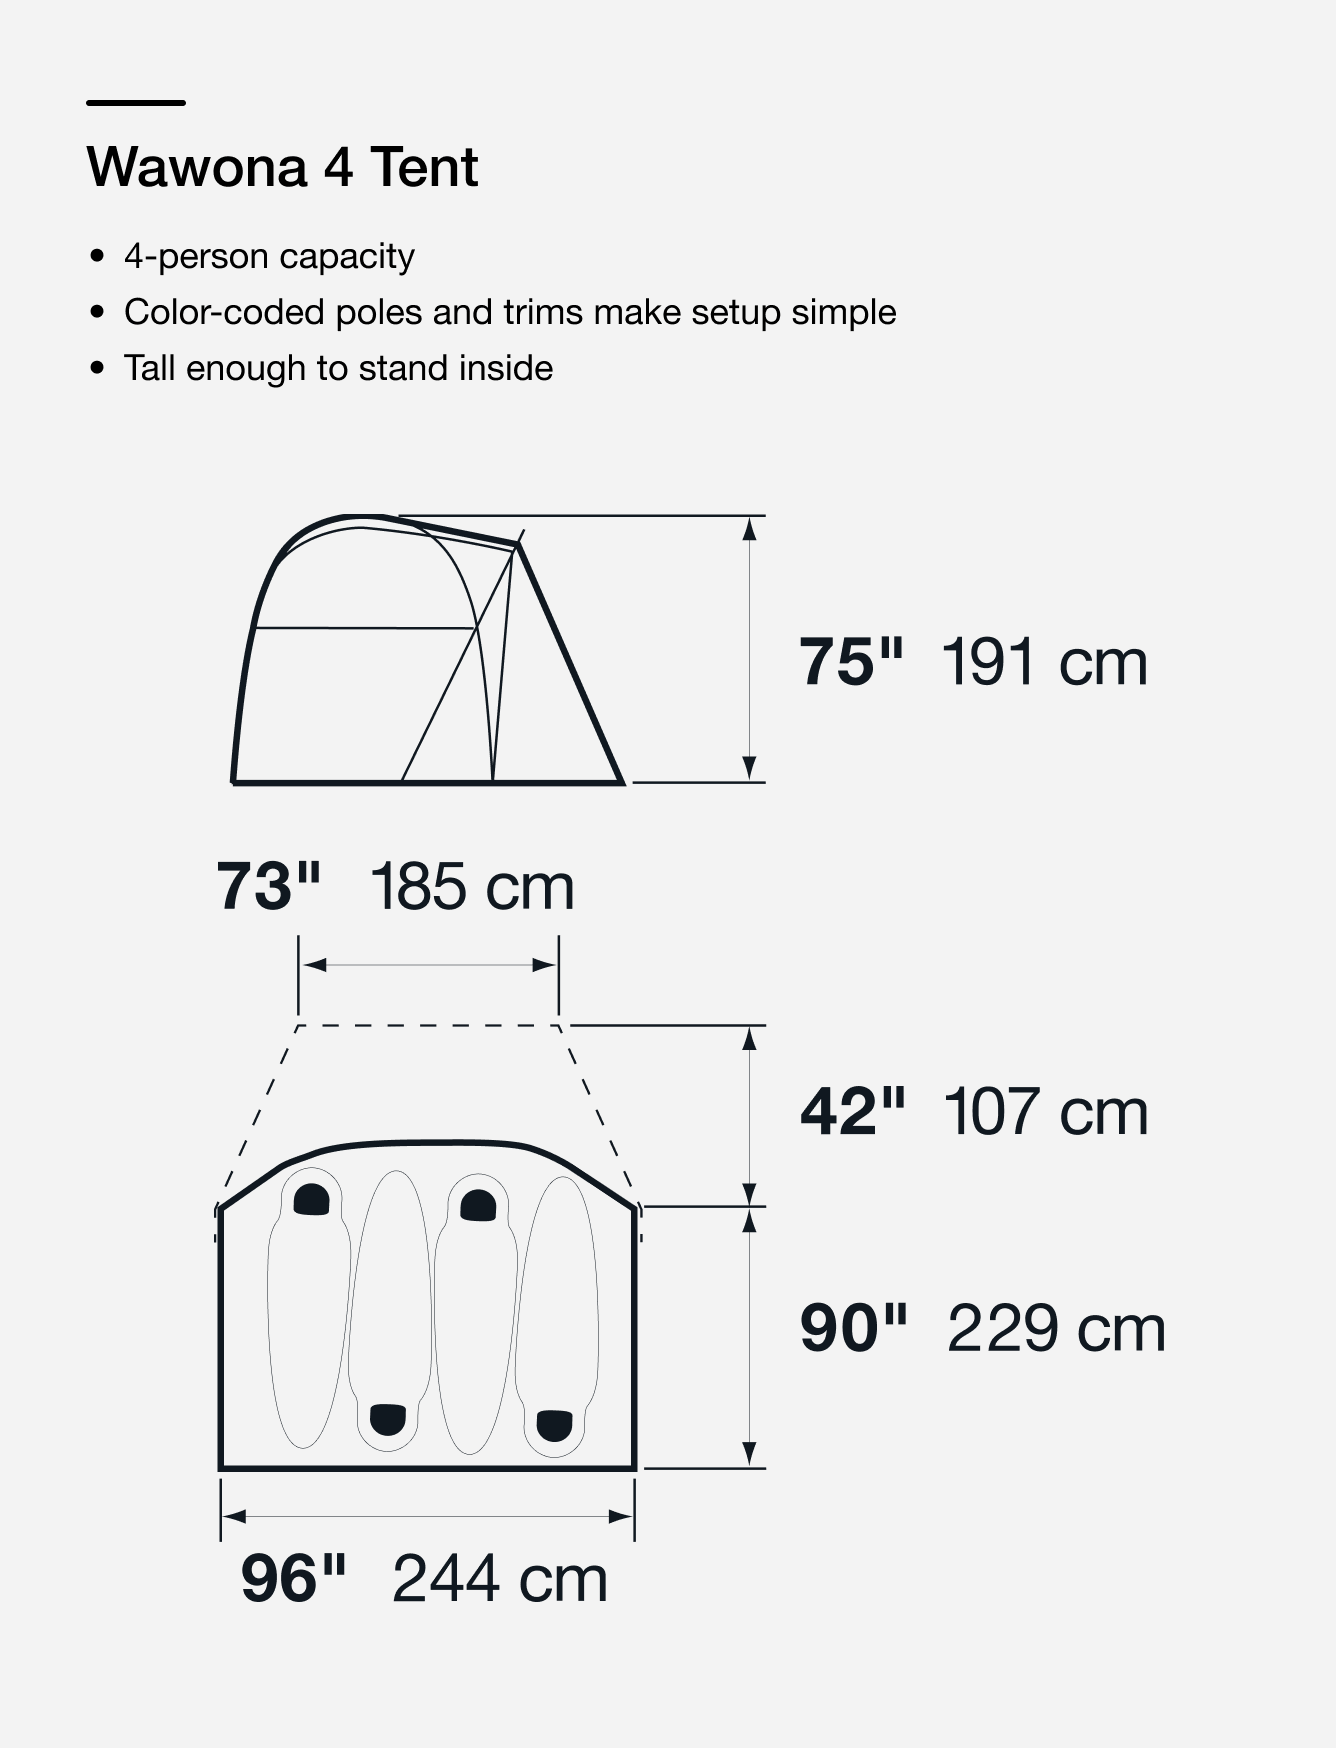 Product imagery of the Wawona Tent from The North Face with features called out in text overlay.